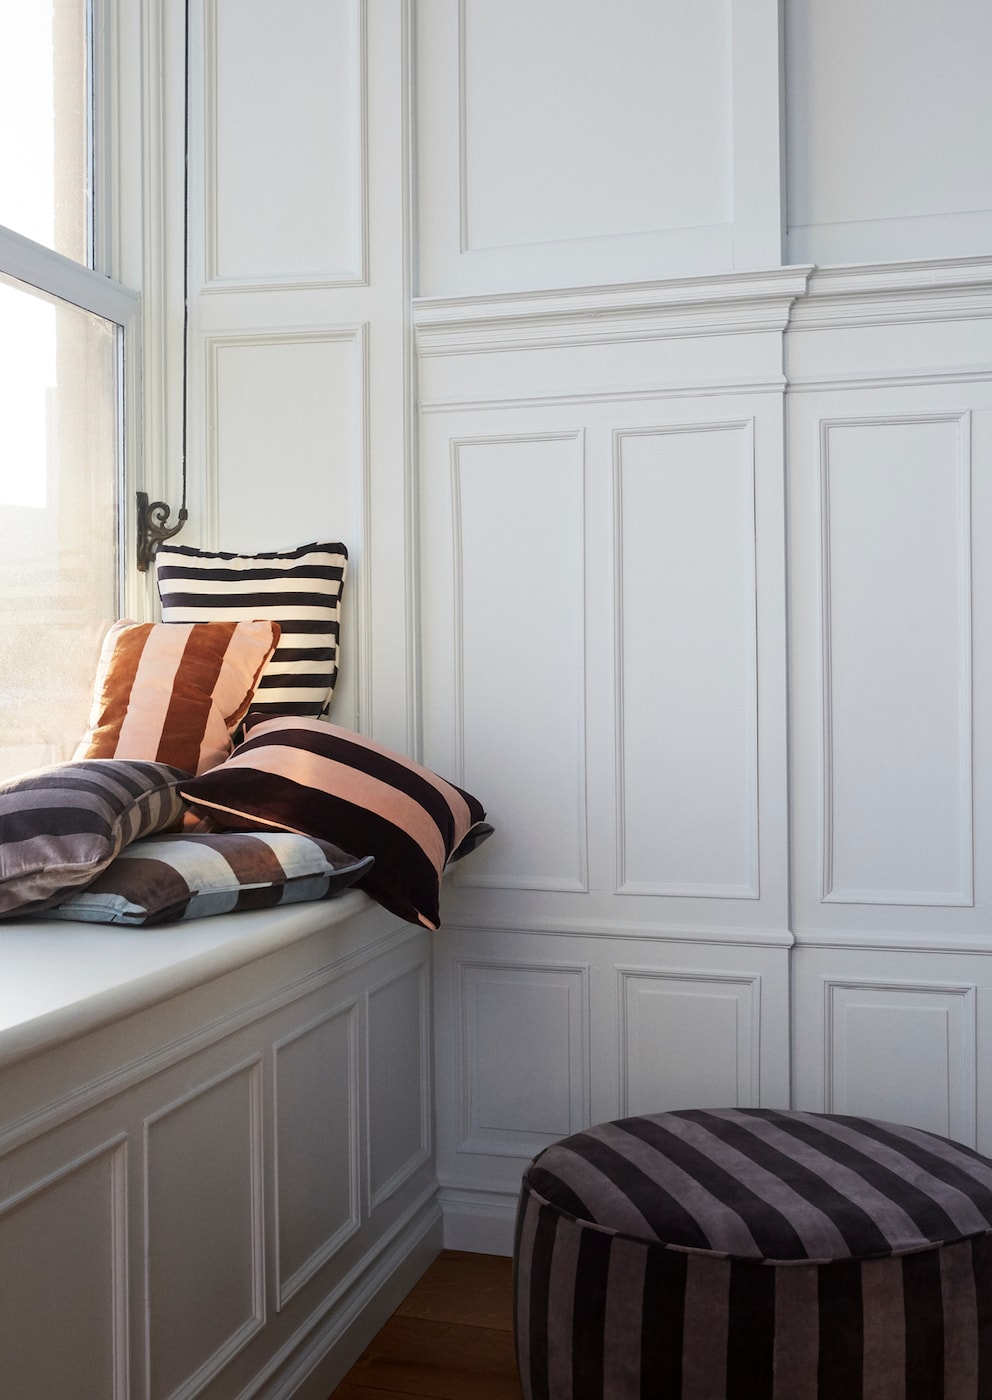 All it takes is a pillow, stool or blanket and you’ve got a new cosy retreat – with a view.